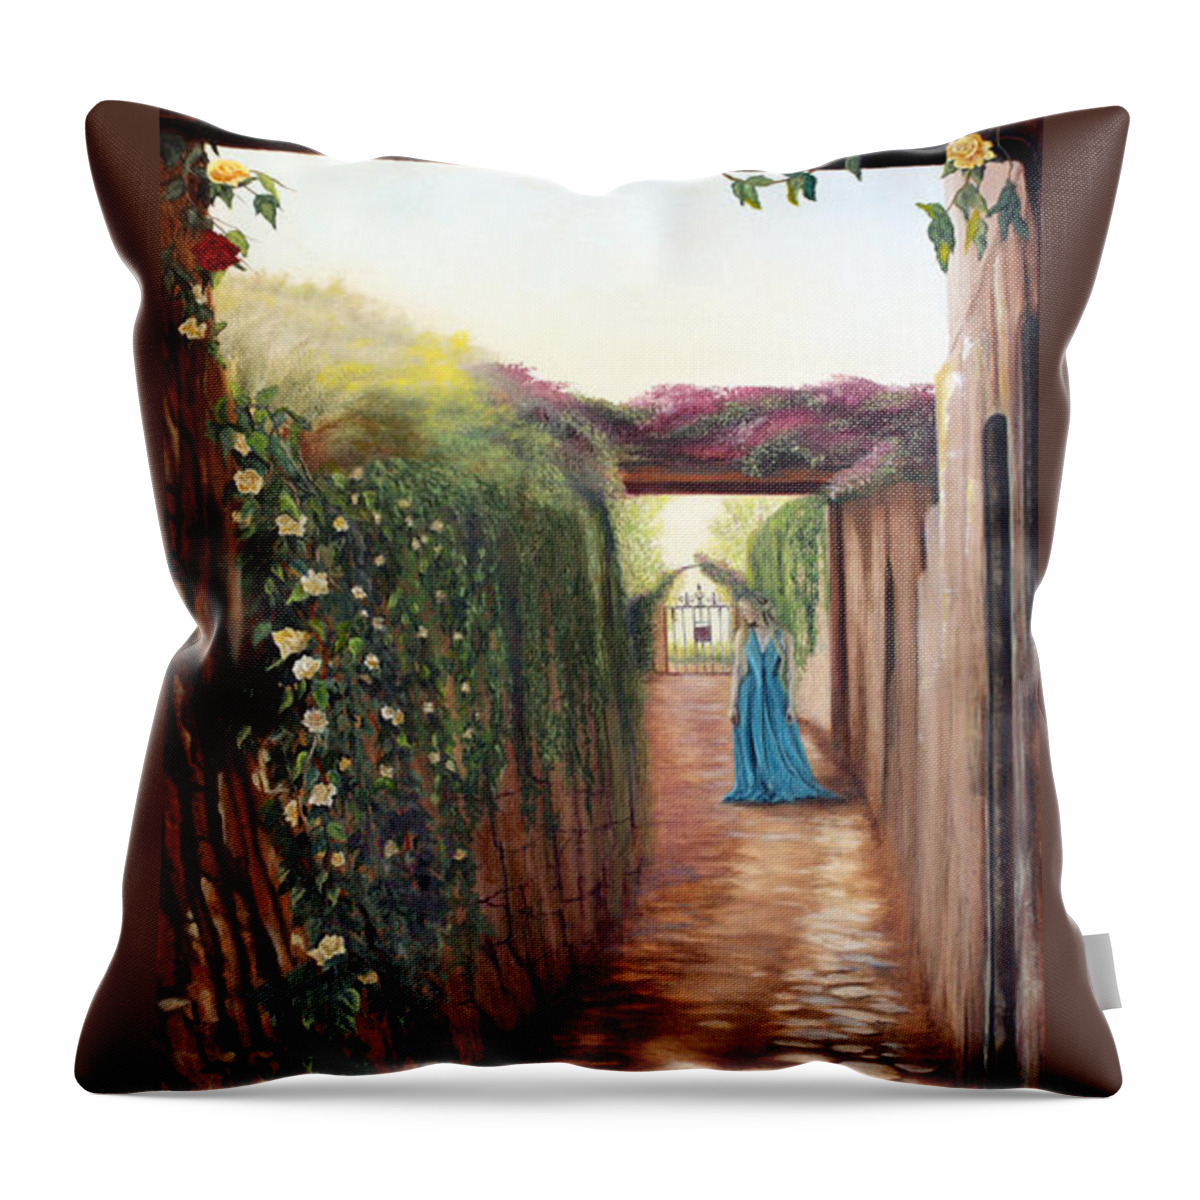 Figurative Throw Pillow featuring the painting The Narrow Gate by Jeanette Sthamann